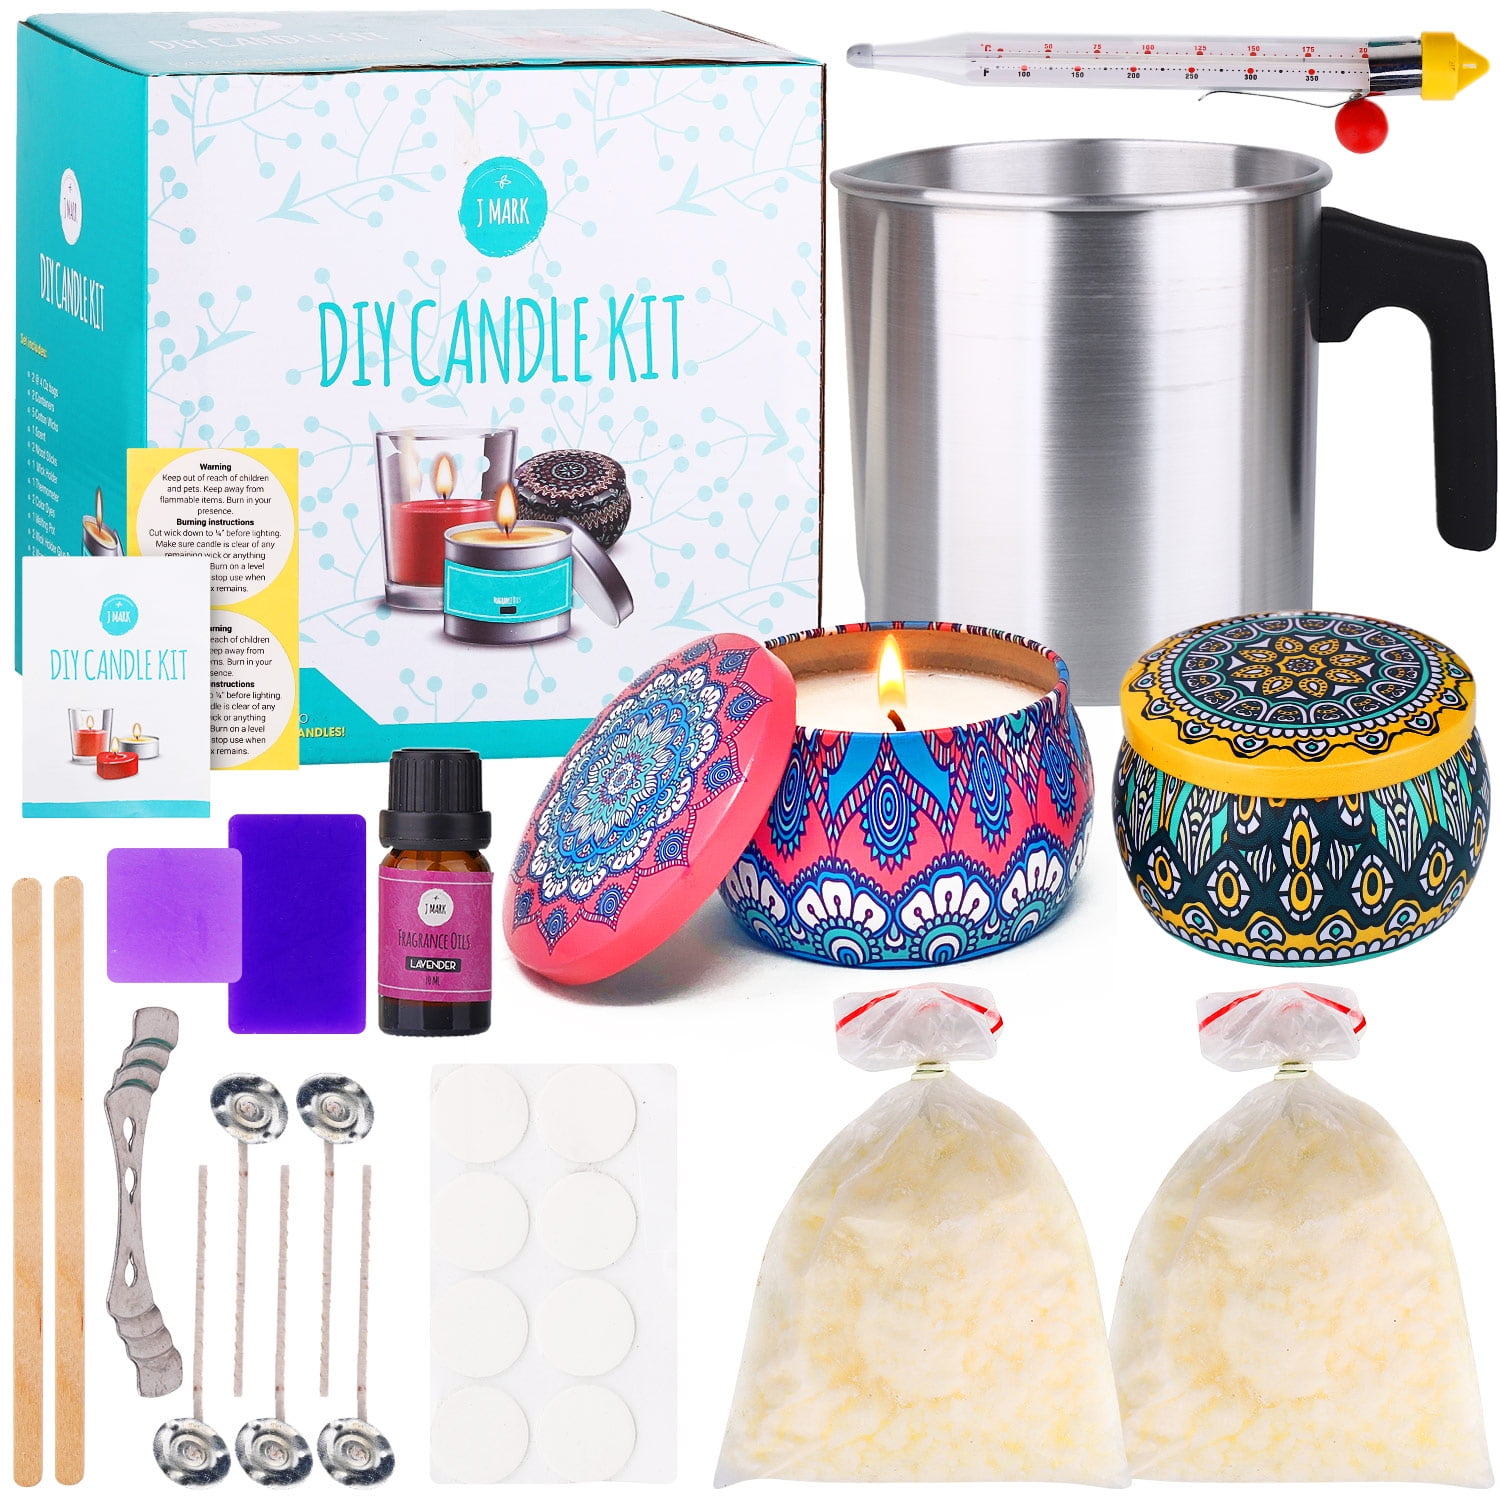 DIY Candle Making Kit for Adults –22 PCS All Inclusive with 2 Decorative  Candle Tins, 2 Soy Wax, Dye, 1 Fragrance Oils, 5 Cotton Wicks, 1 Melting  Pot